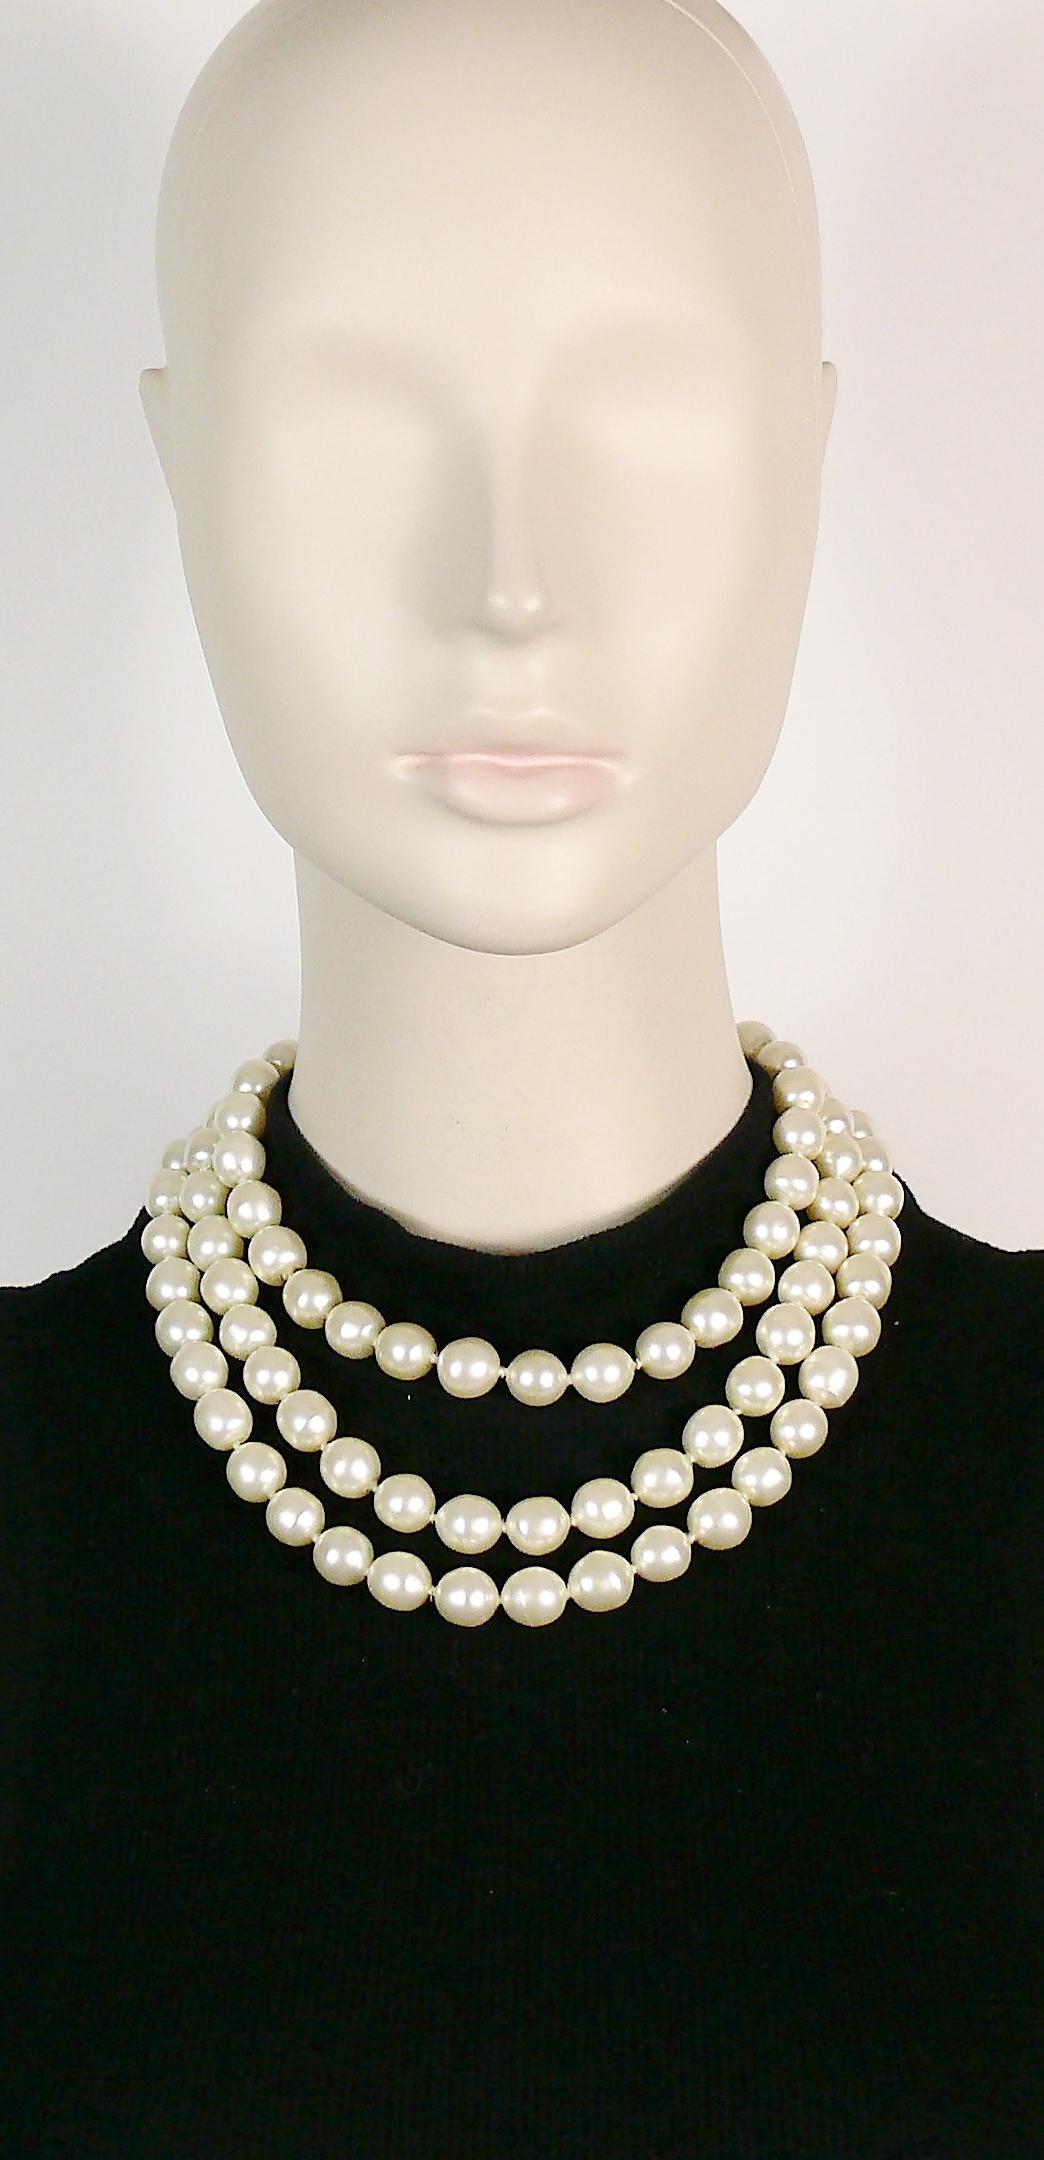 CHANEL vintage iconic triple strand glass pearl necklace with gold toned hardware.

Hook clasp closure

Embossed CHANEL Made in France.

Indicative measurements : lenght approx. 40.5 cm (15.94 inches).

JEWELRY CONDITION CHART
- New or never worn :